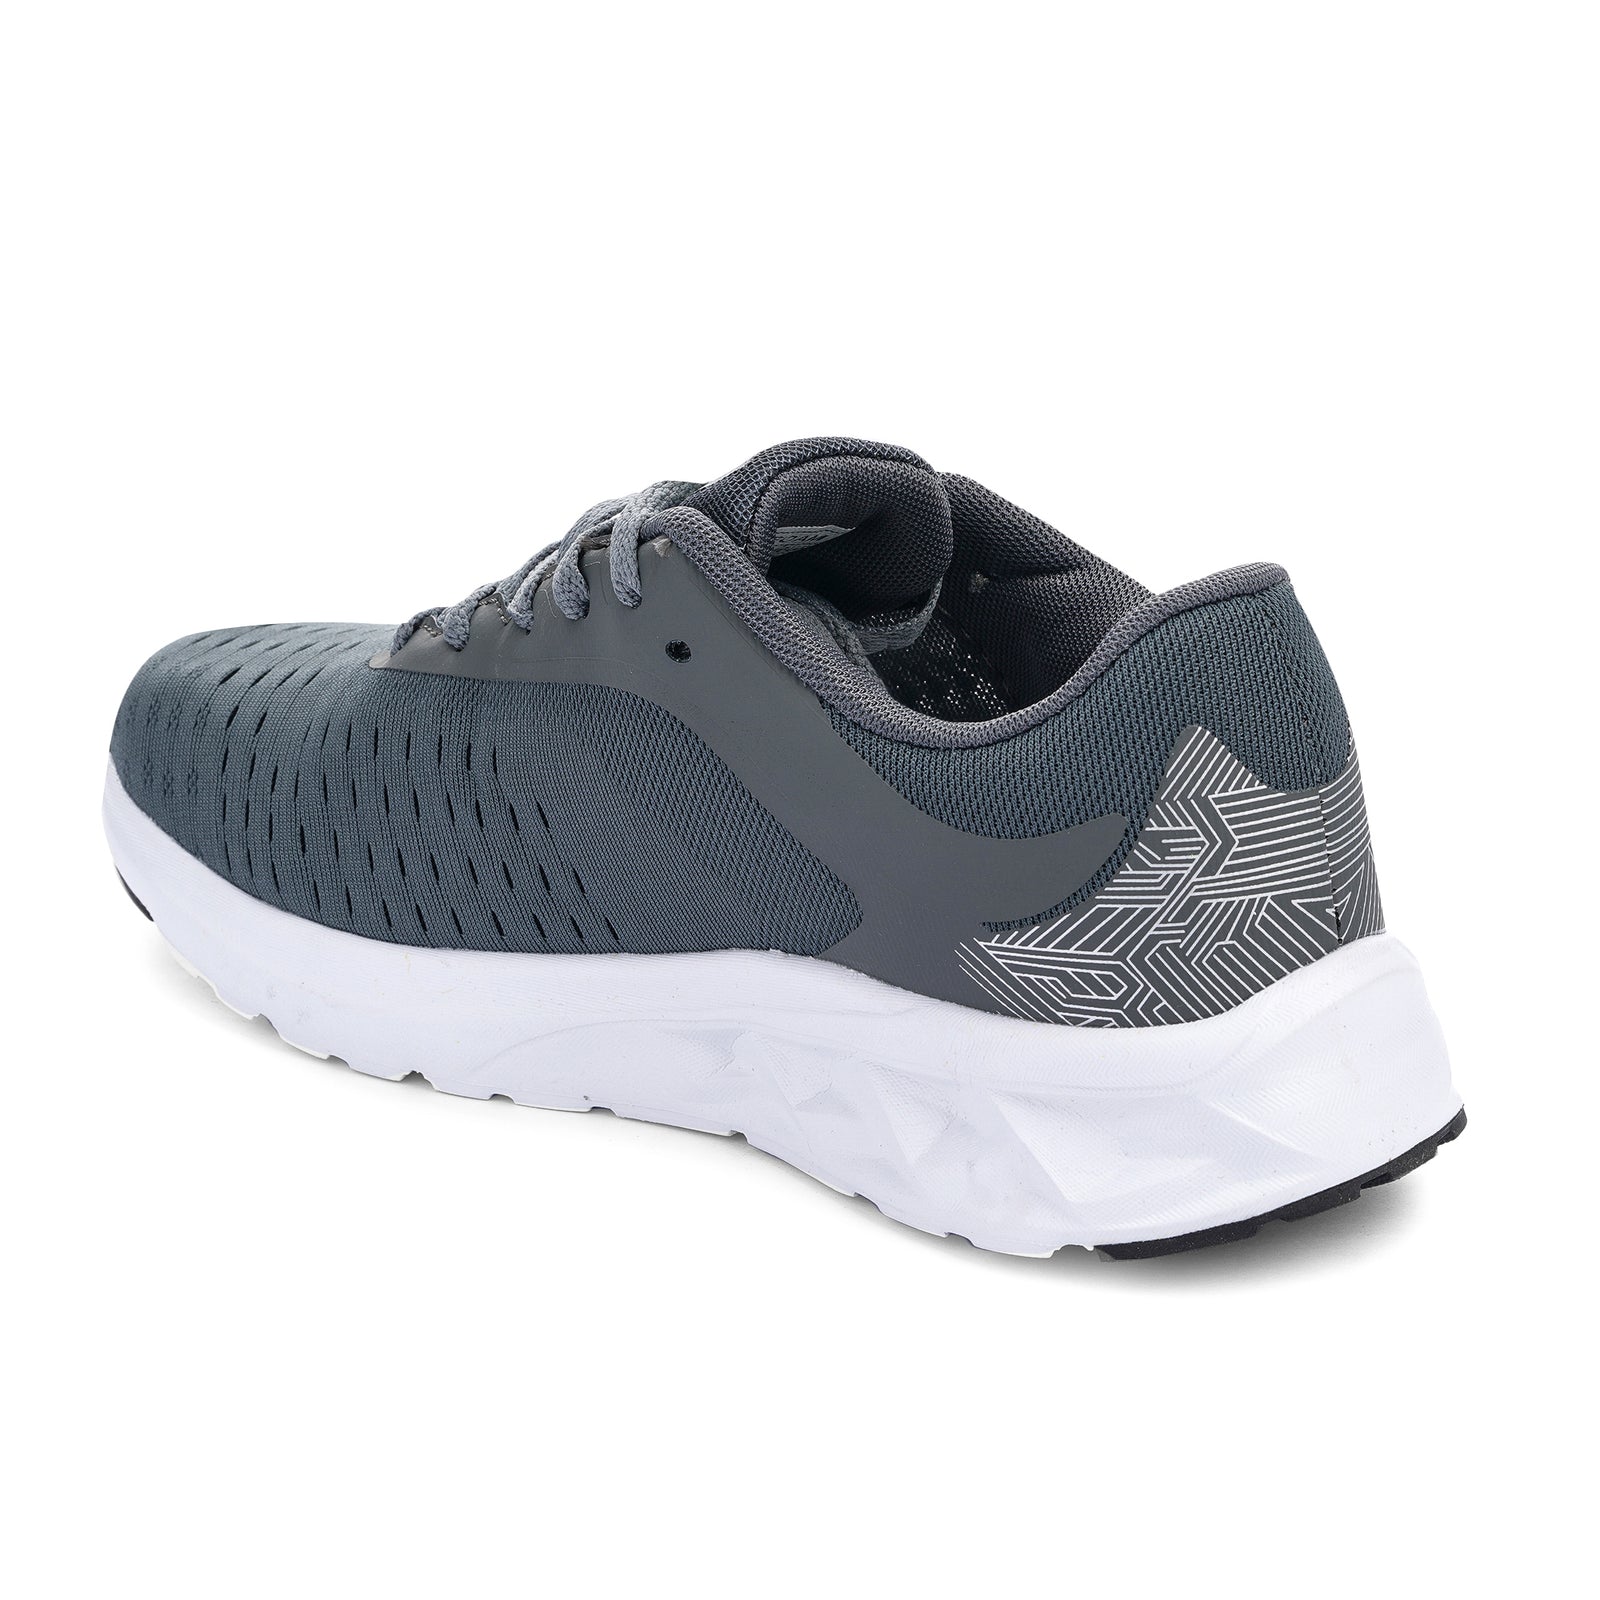 Buy Running Shoes For Men: Dragonblk | Campus Shoes